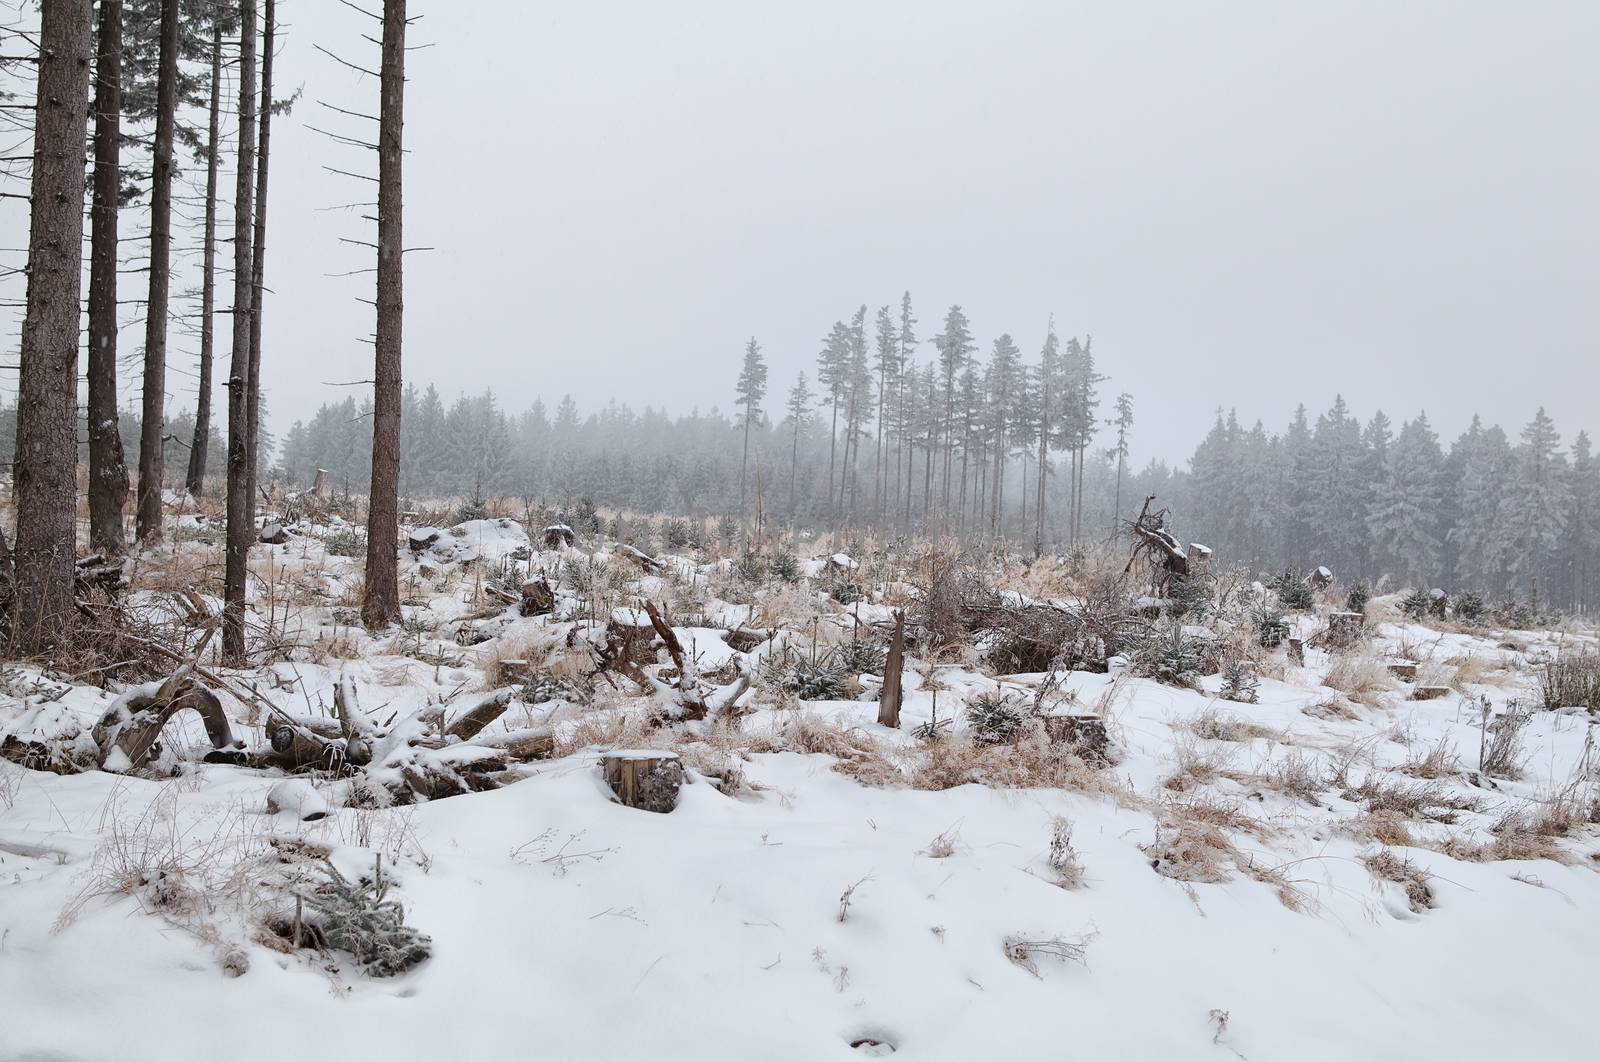 snowing over meadow in coniferous forest, Harz mountains, Germany